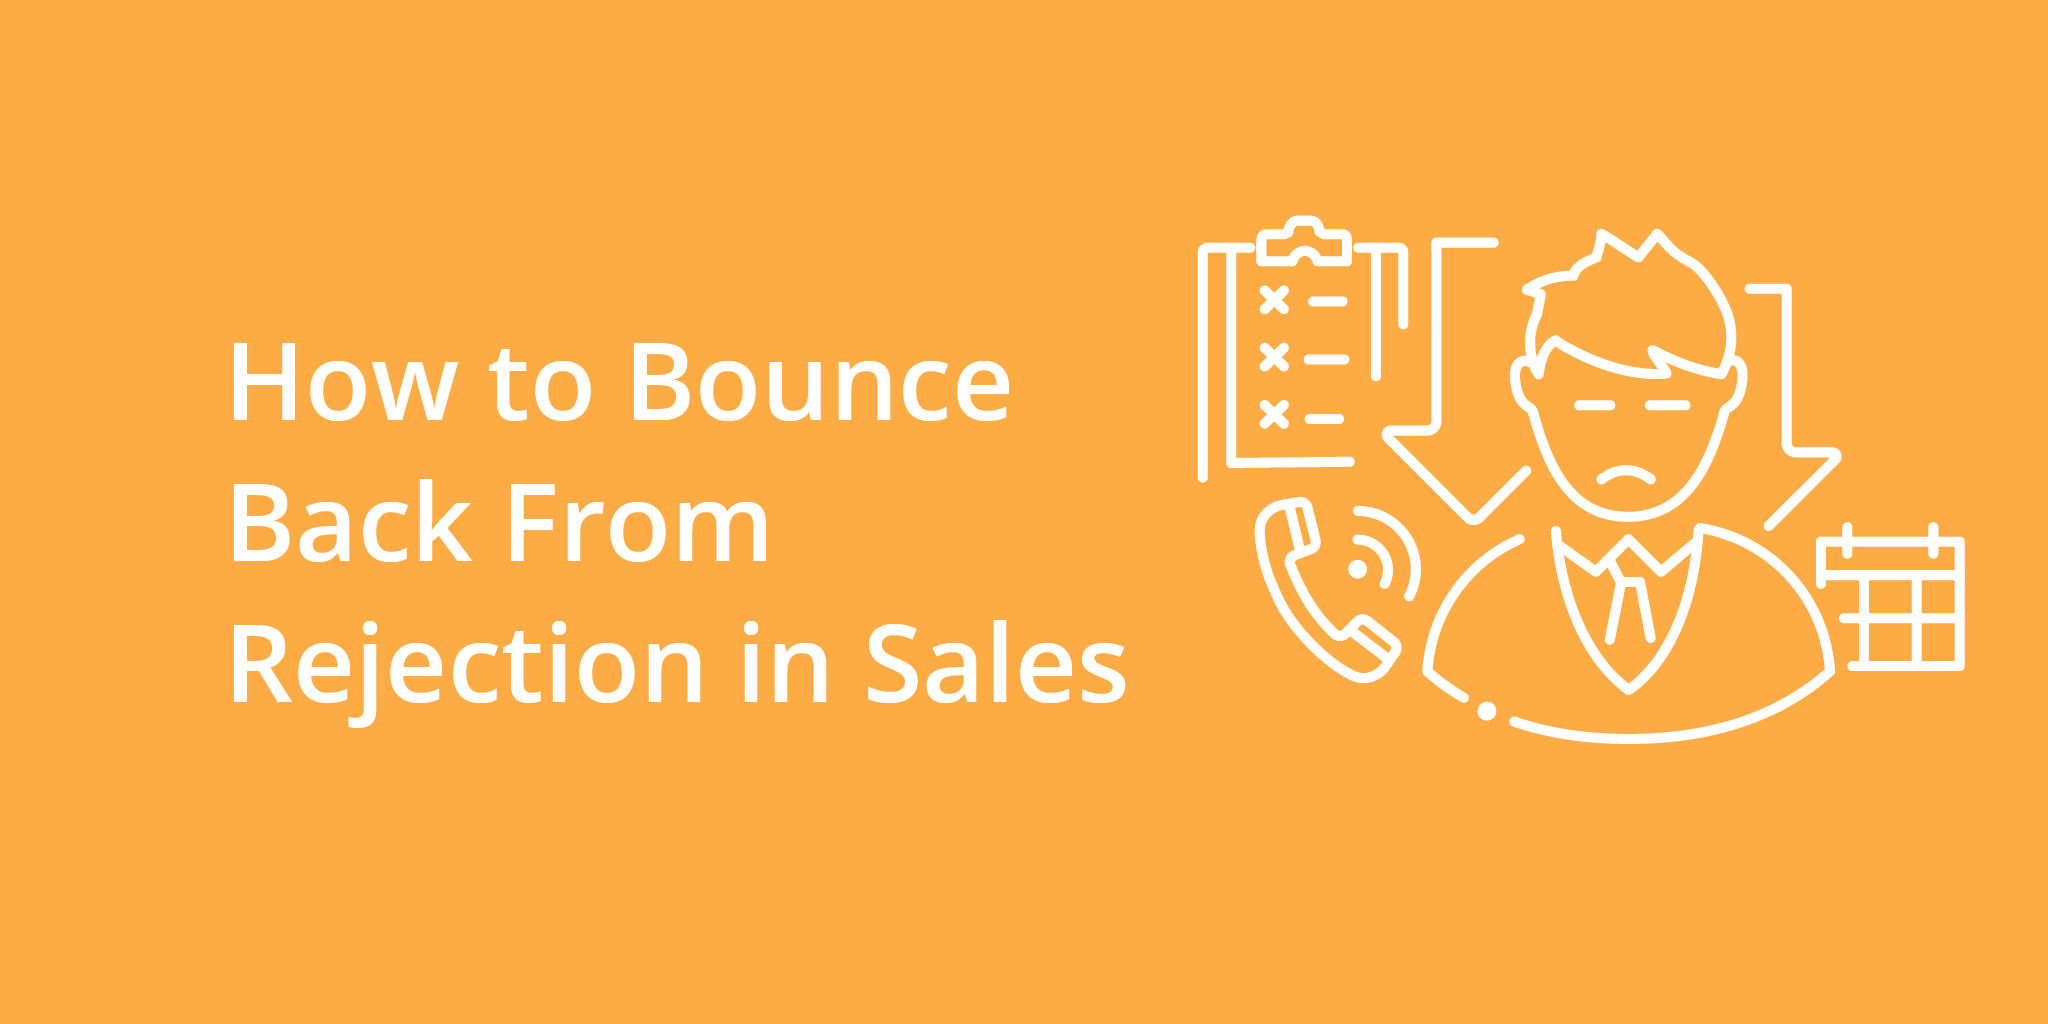 How to Bounce Back From Rejection in Sales | Telephones for business